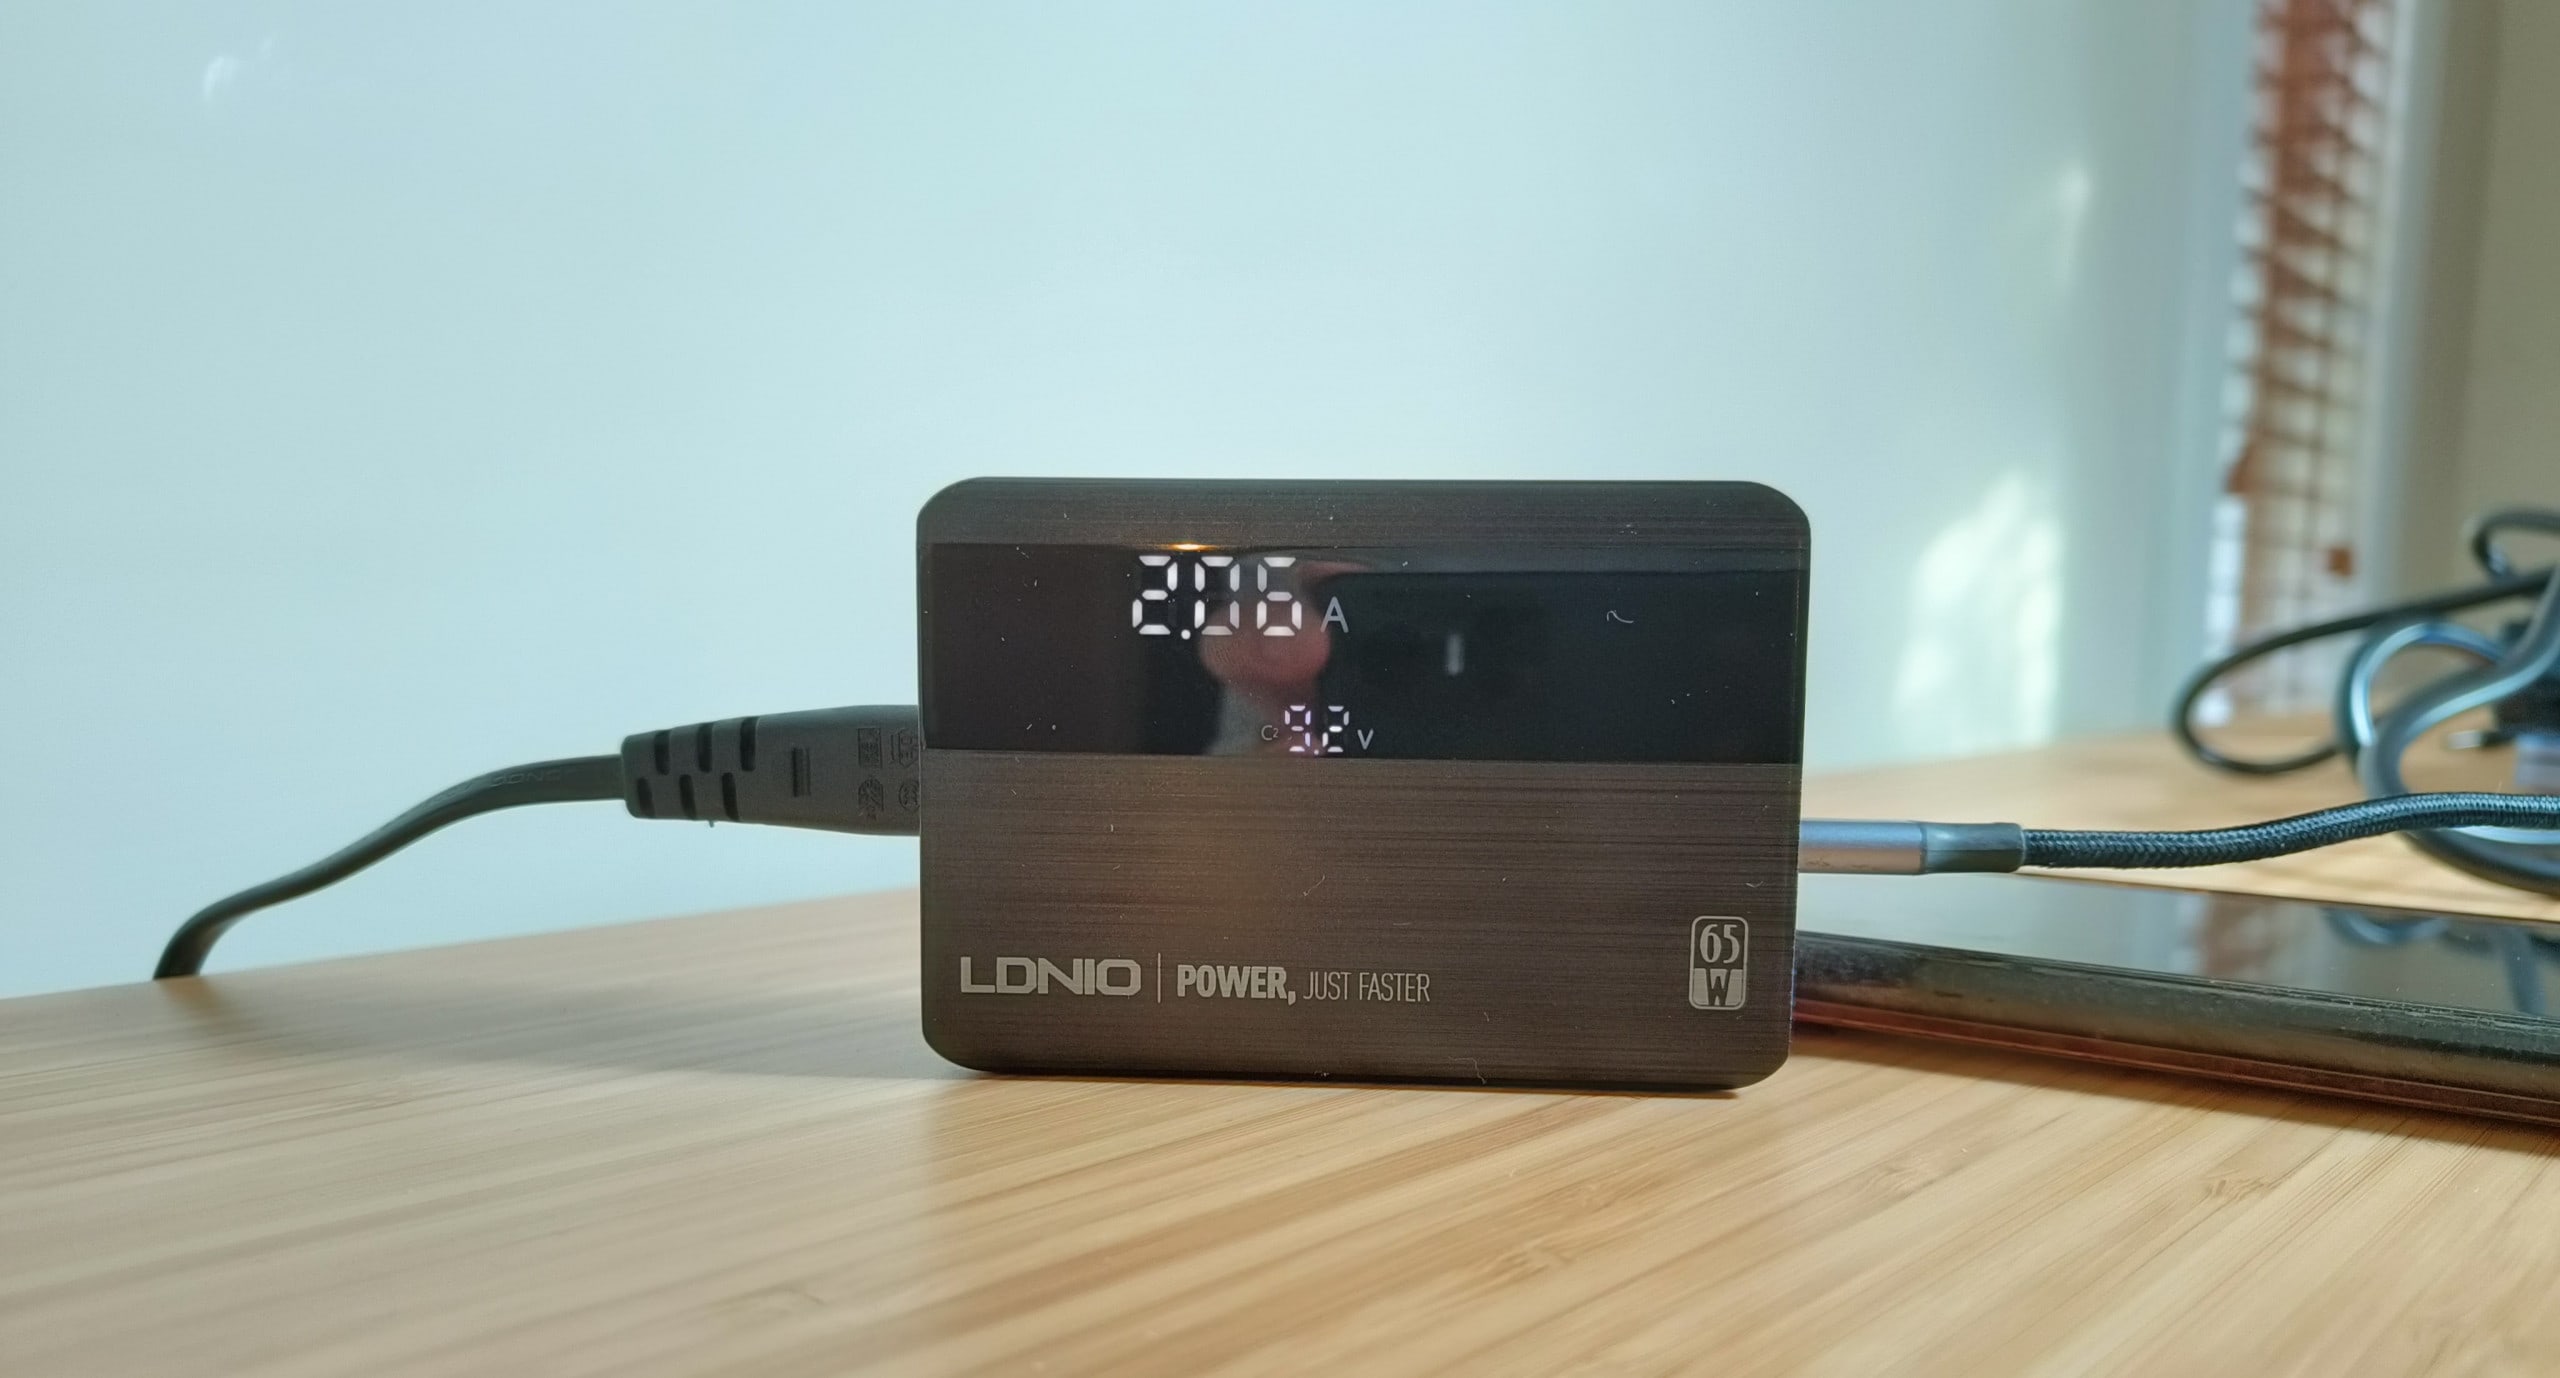 LDNIO 65W USB Power Delivery Charging Station Review scaled